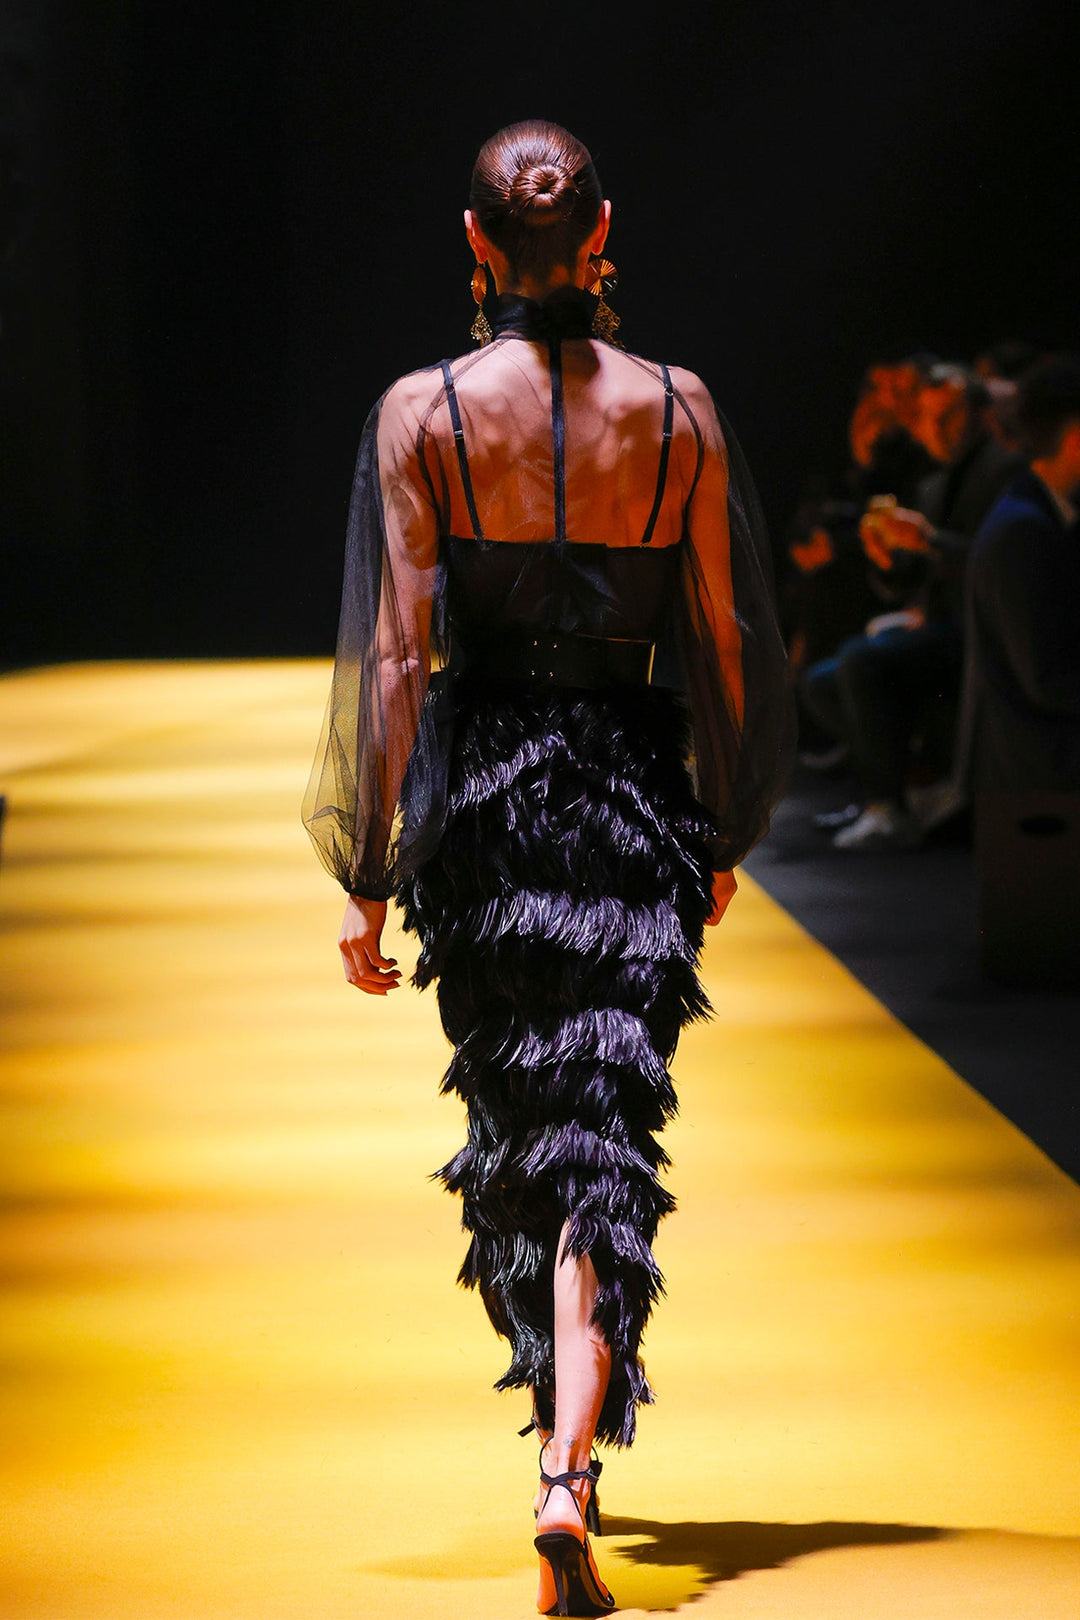 Sheer Tulle Shirt with Corset and Feathered Skirt